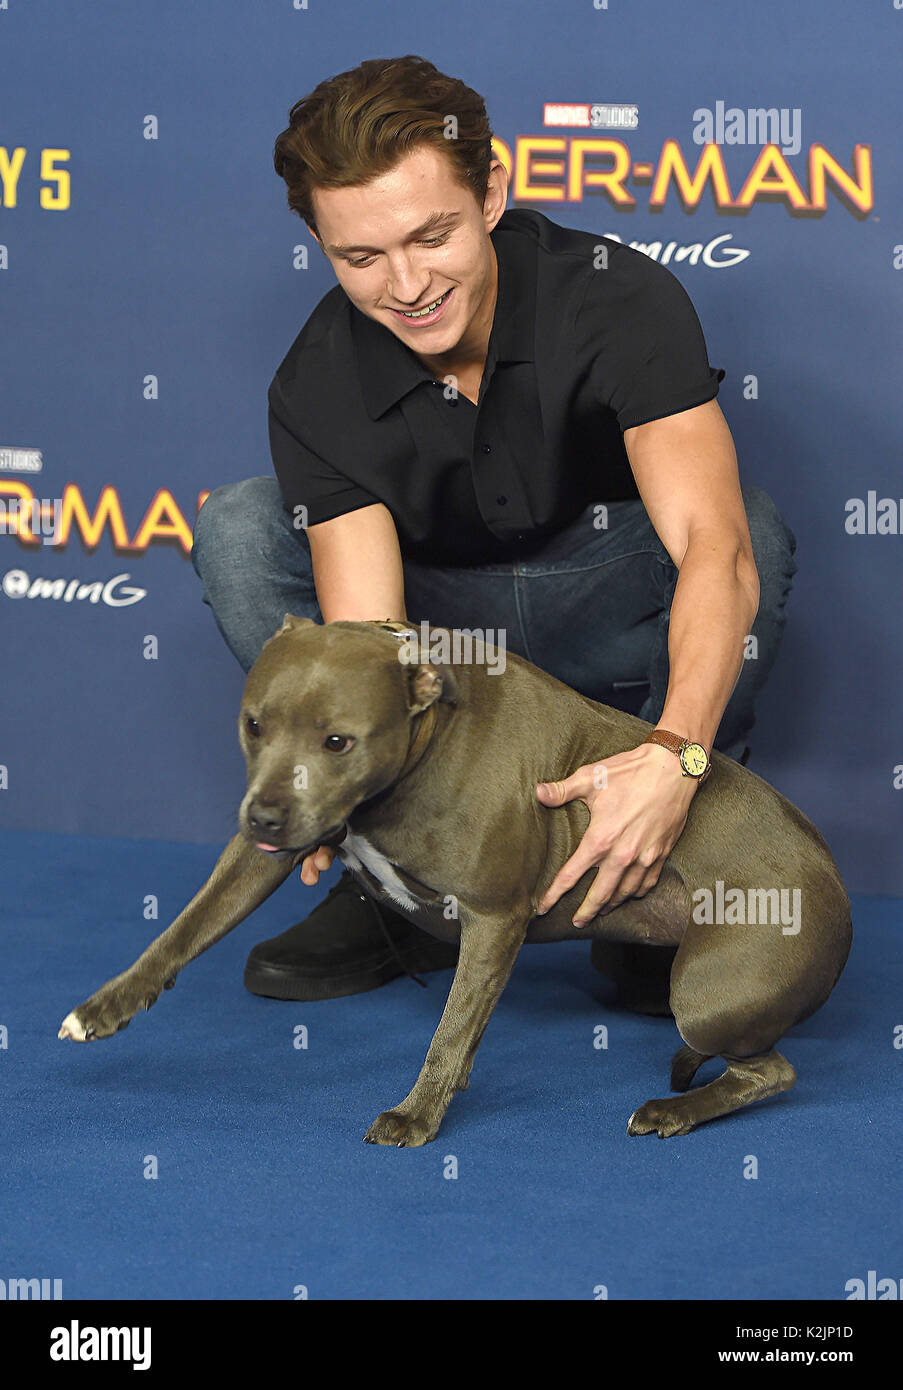 Photo Must Be Credited ©Alpha Press 079965 15/06/2017 Tom Holland and his dog Tessa at the Spider Man Homecoming Movie Photocall held at Ham Yard Hotel in London Stock Photo